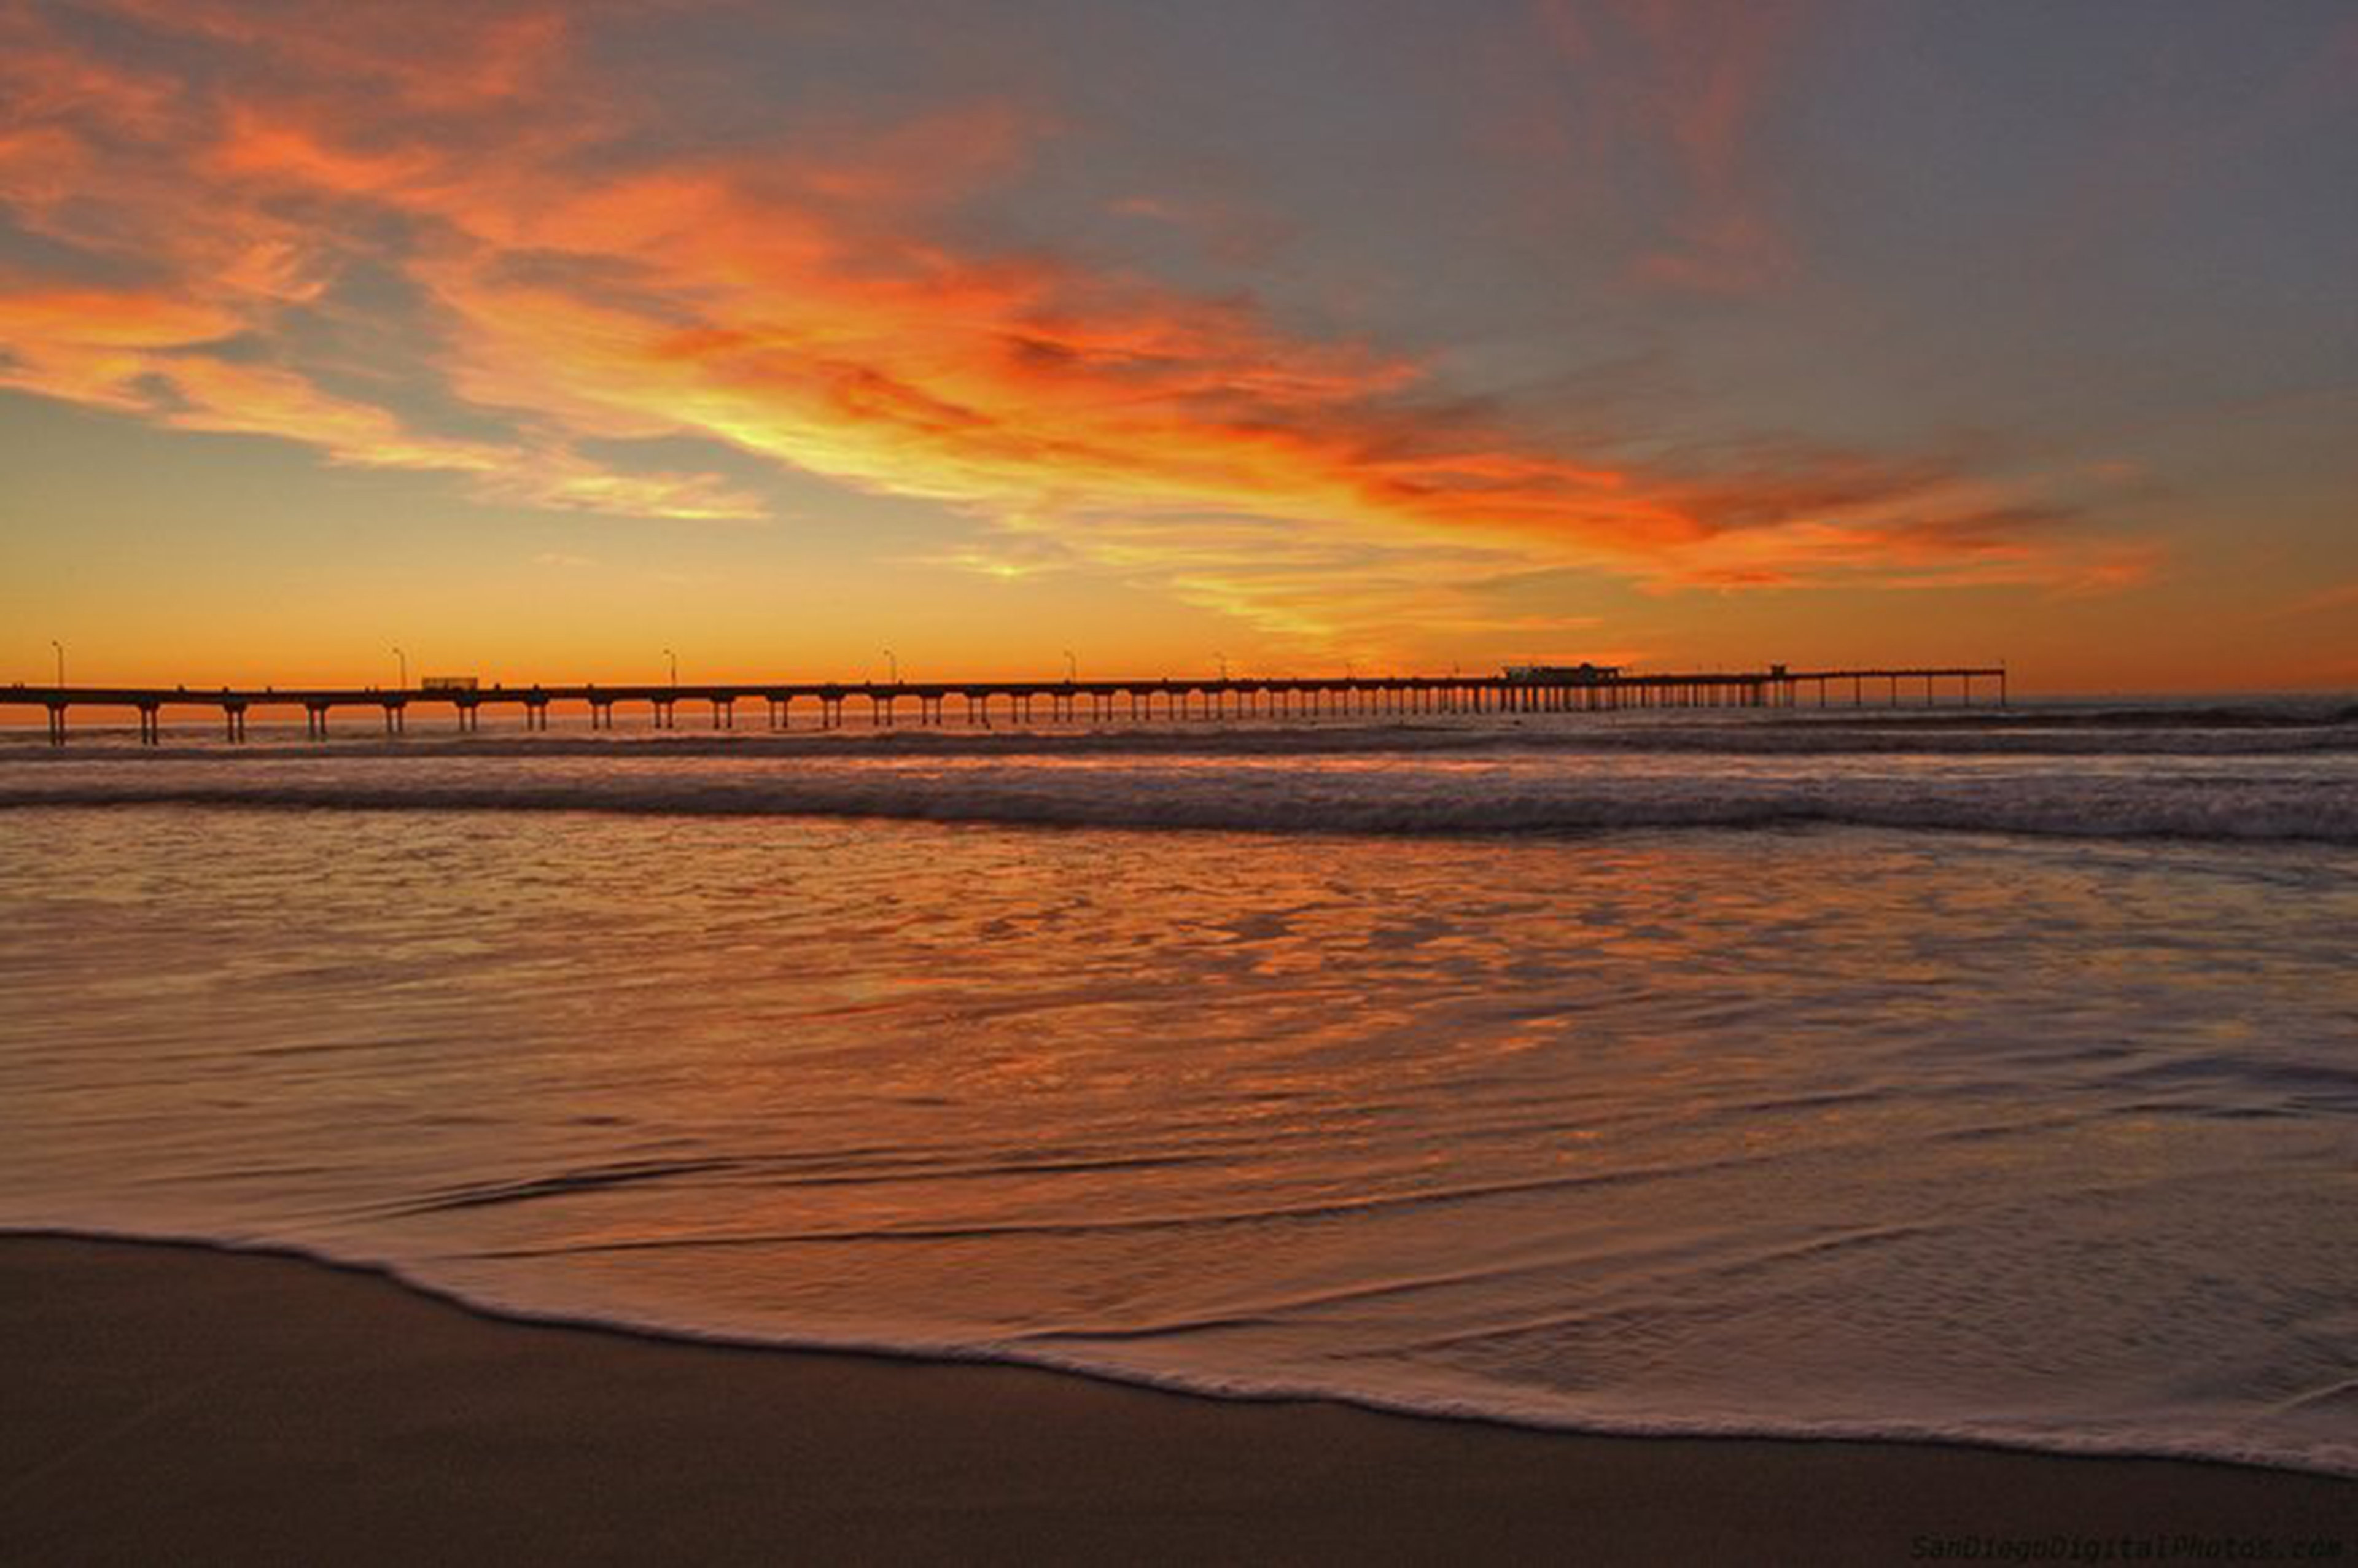 Be dazzled by the beauty that Pacific Beach has to offer.